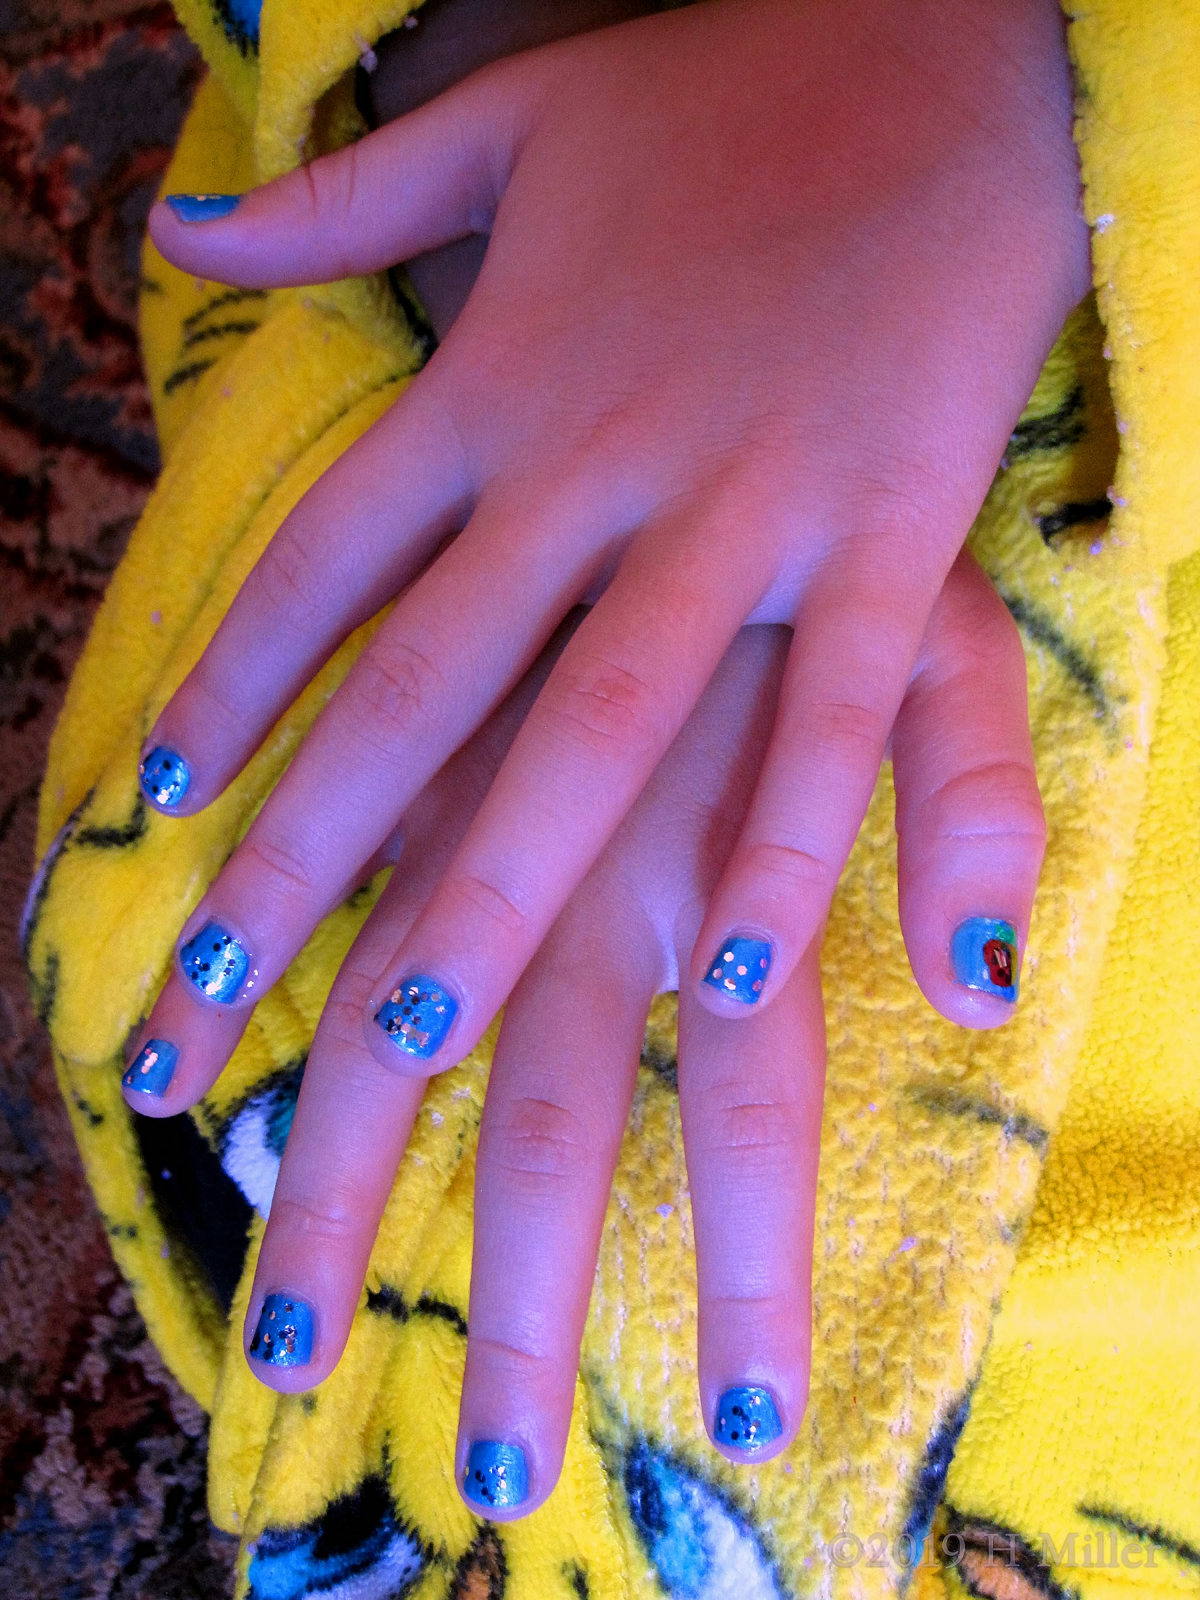 Strawberries And Their Seeds Nail Art On Blue Polished Kids Manicure For This Spa Party Guest!